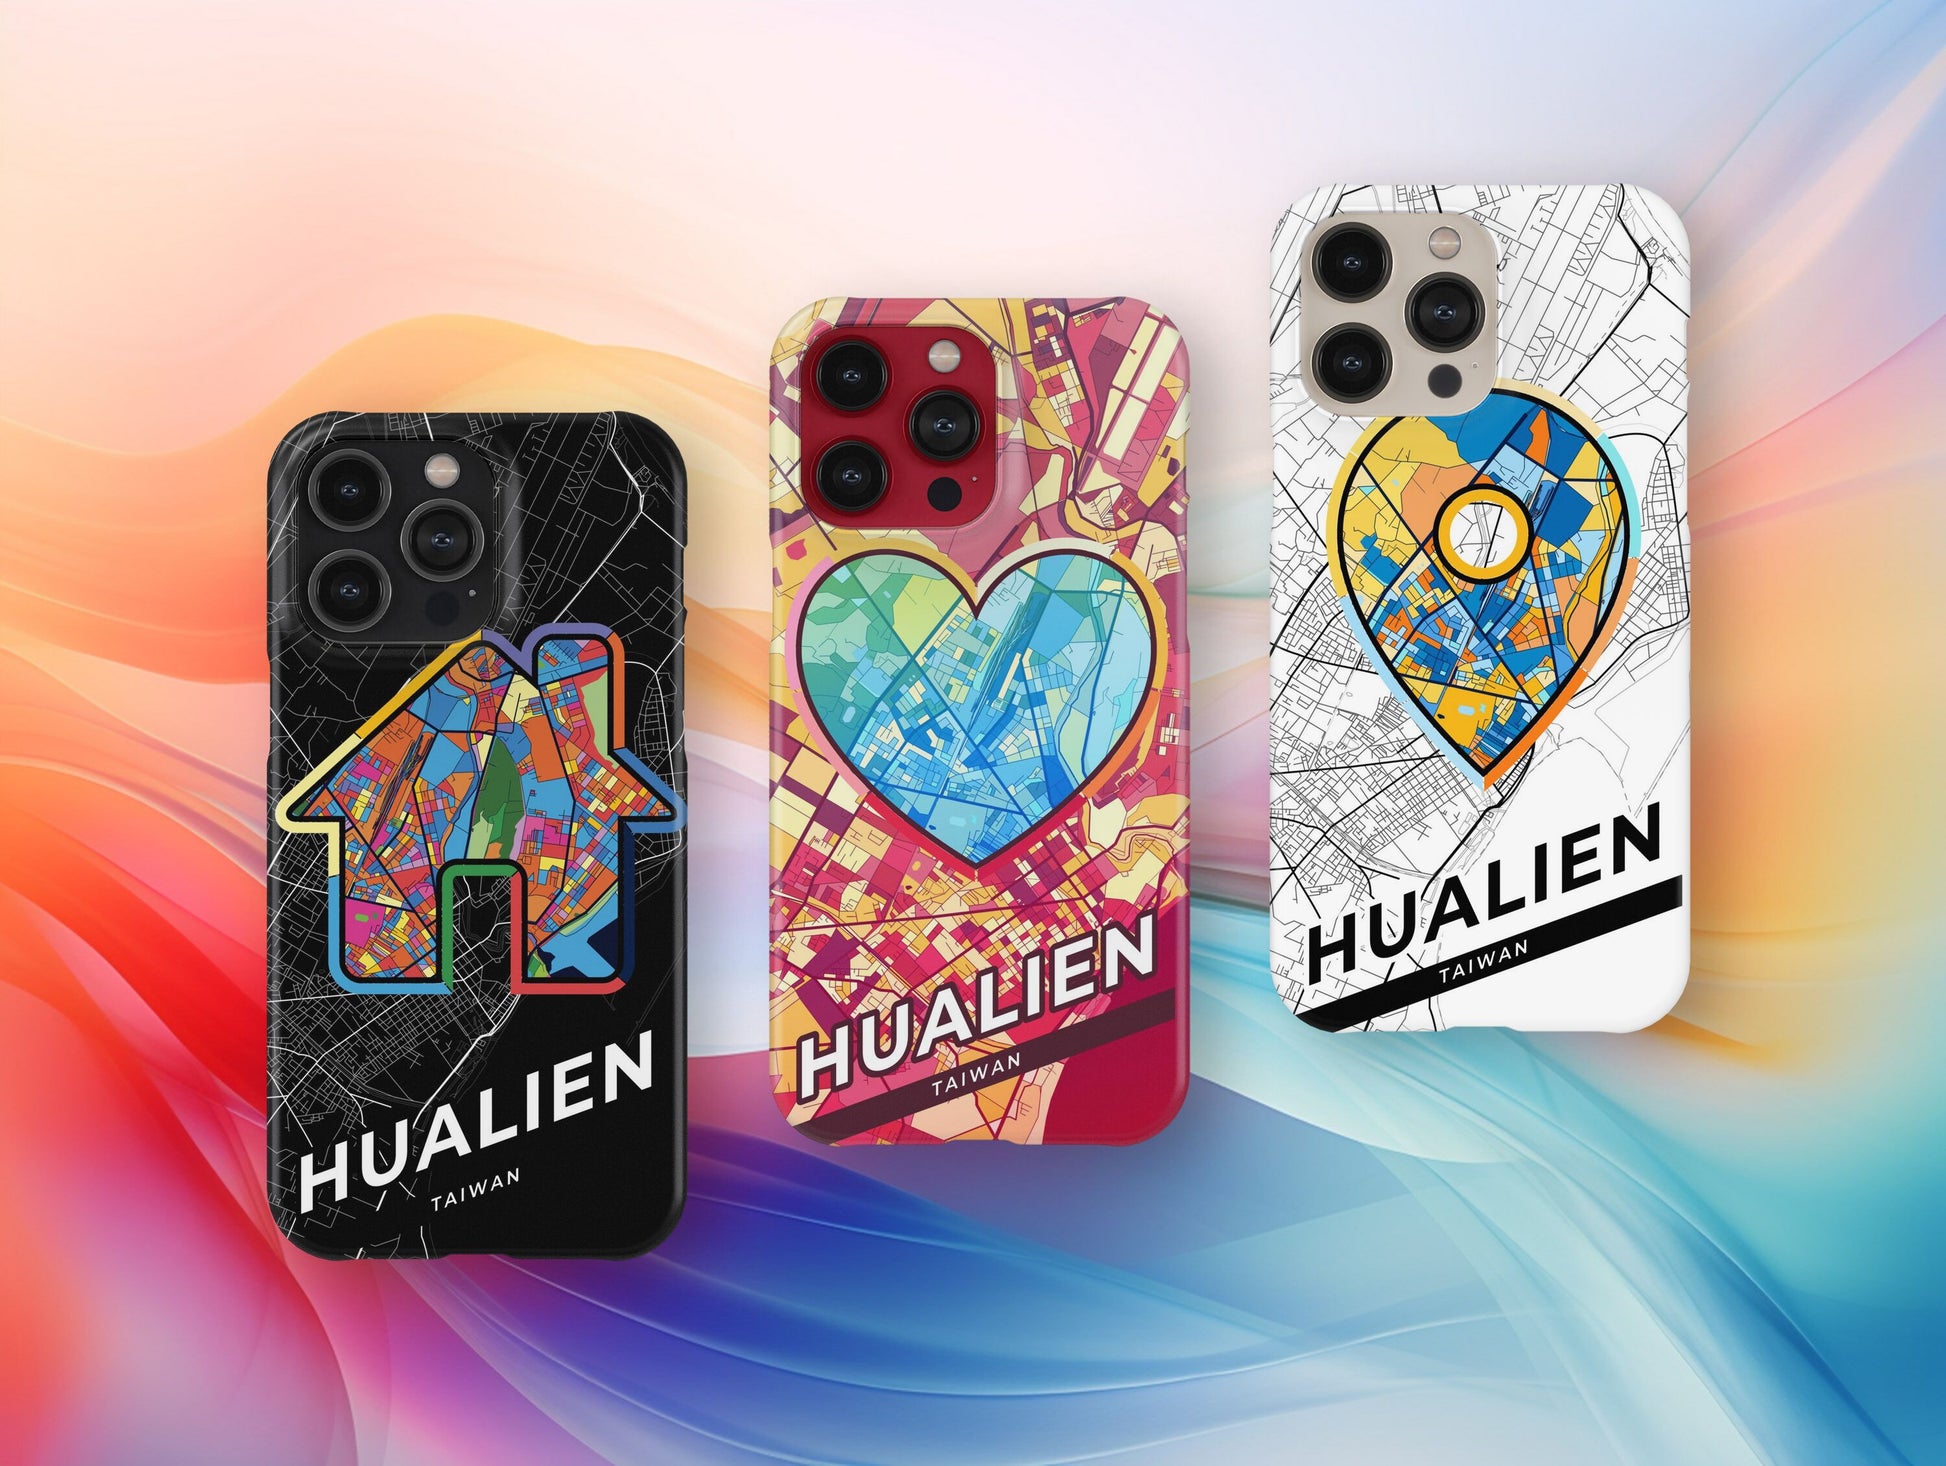 Hualien Taiwan slim phone case with colorful icon. Birthday, wedding or housewarming gift. Couple match cases.